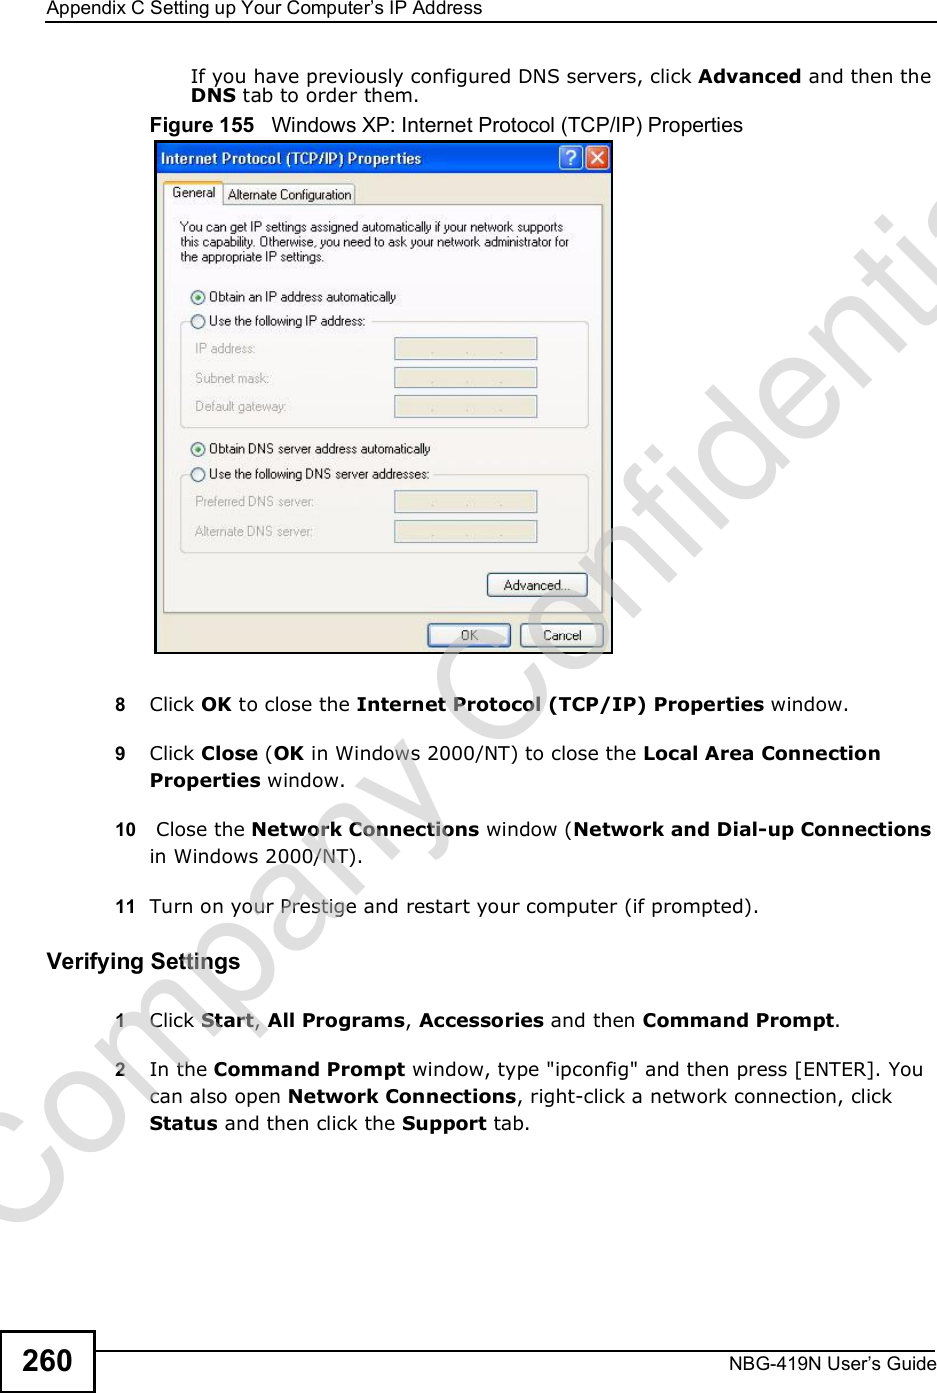 Appendix CSetting up Your Computer s IP AddressNBG-419N User s Guide260If you have previously configured DNS servers, click Advanced and then the DNS tab to order them.Figure 155   Windows XP: Internet Protocol (TCP/IP) Properties8Click OK to close the Internet Protocol (TCP/IP) Properties window.9Click Close (OK in Windows 2000/NT) to close the Local Area Connection Properties window.10  Close the Network Connections window (Network and Dial-up Connections in Windows 2000/NT).11 Turn on your Prestige and restart your computer (if prompted).Verifying Settings1Click Start, All Programs, Accessories and then Command Prompt.2In the Command Prompt window, type &quot;ipconfig&quot; and then press [ENTER]. You can also open Network Connections, right-click a network connection, click Status and then click the Support tab.Company Confidential